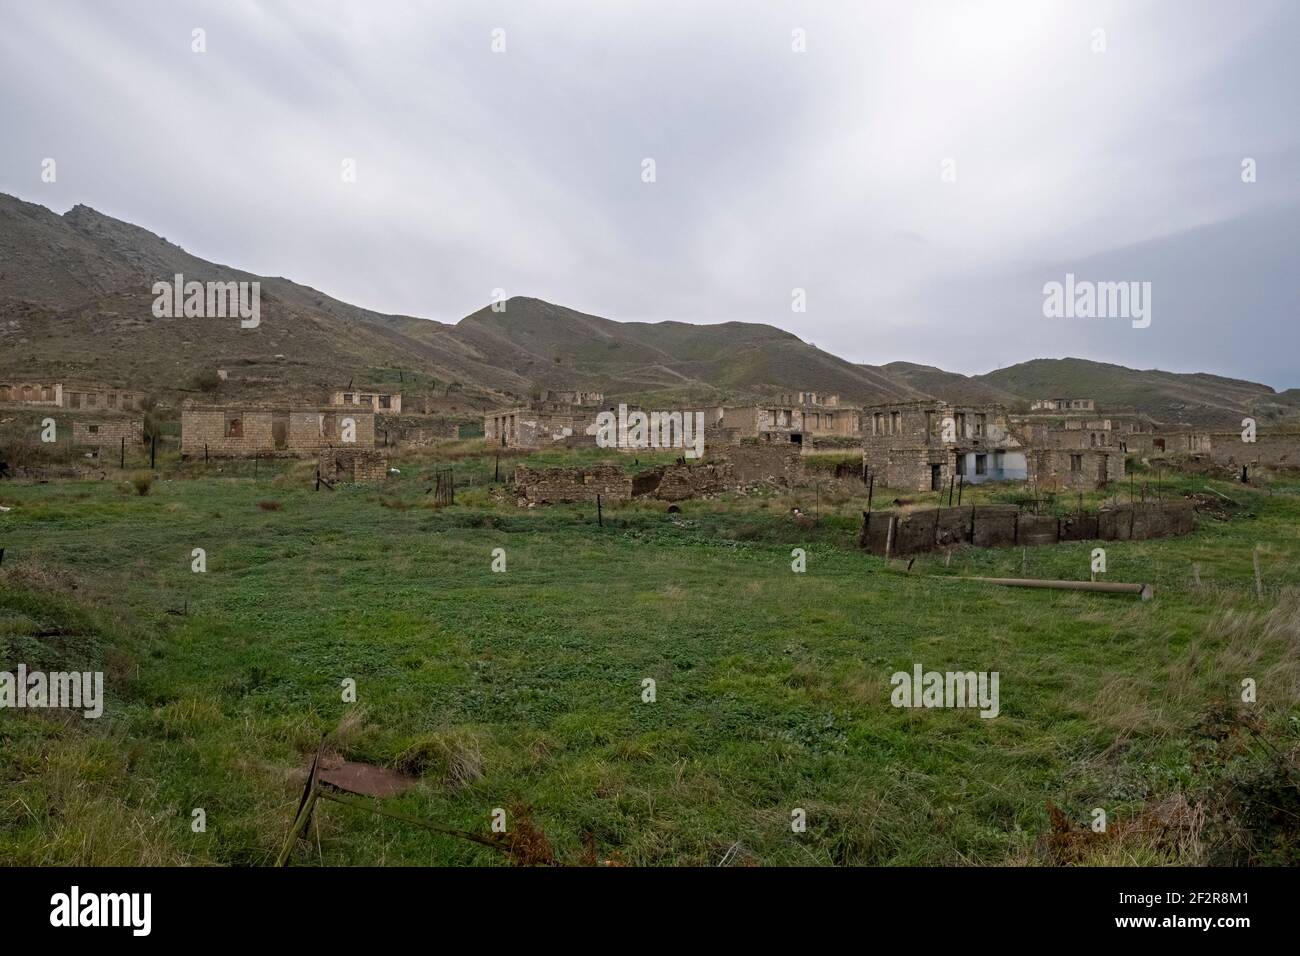 JABRAYIL, AZERBAIJAN - DECEMBER 15: View of the deserted village of Khodaafarin which was occupied by the Armenian forces in 1993 and recaptured by Azerbaijan military on December 15 2020 in the Jabrayil Rayon of Azerbaijan. Heavy clashes erupted over Nagorno-Karabakh in late September during which more than 5,600 people, including civilians, were killed. The sides agreed to a Russia-brokered cease-fire deal that took effect on November 10, resulting in Azerbaijan regaining control over swaths of territory ethnic Armenians had administered for almost 30 years. Stock Photo